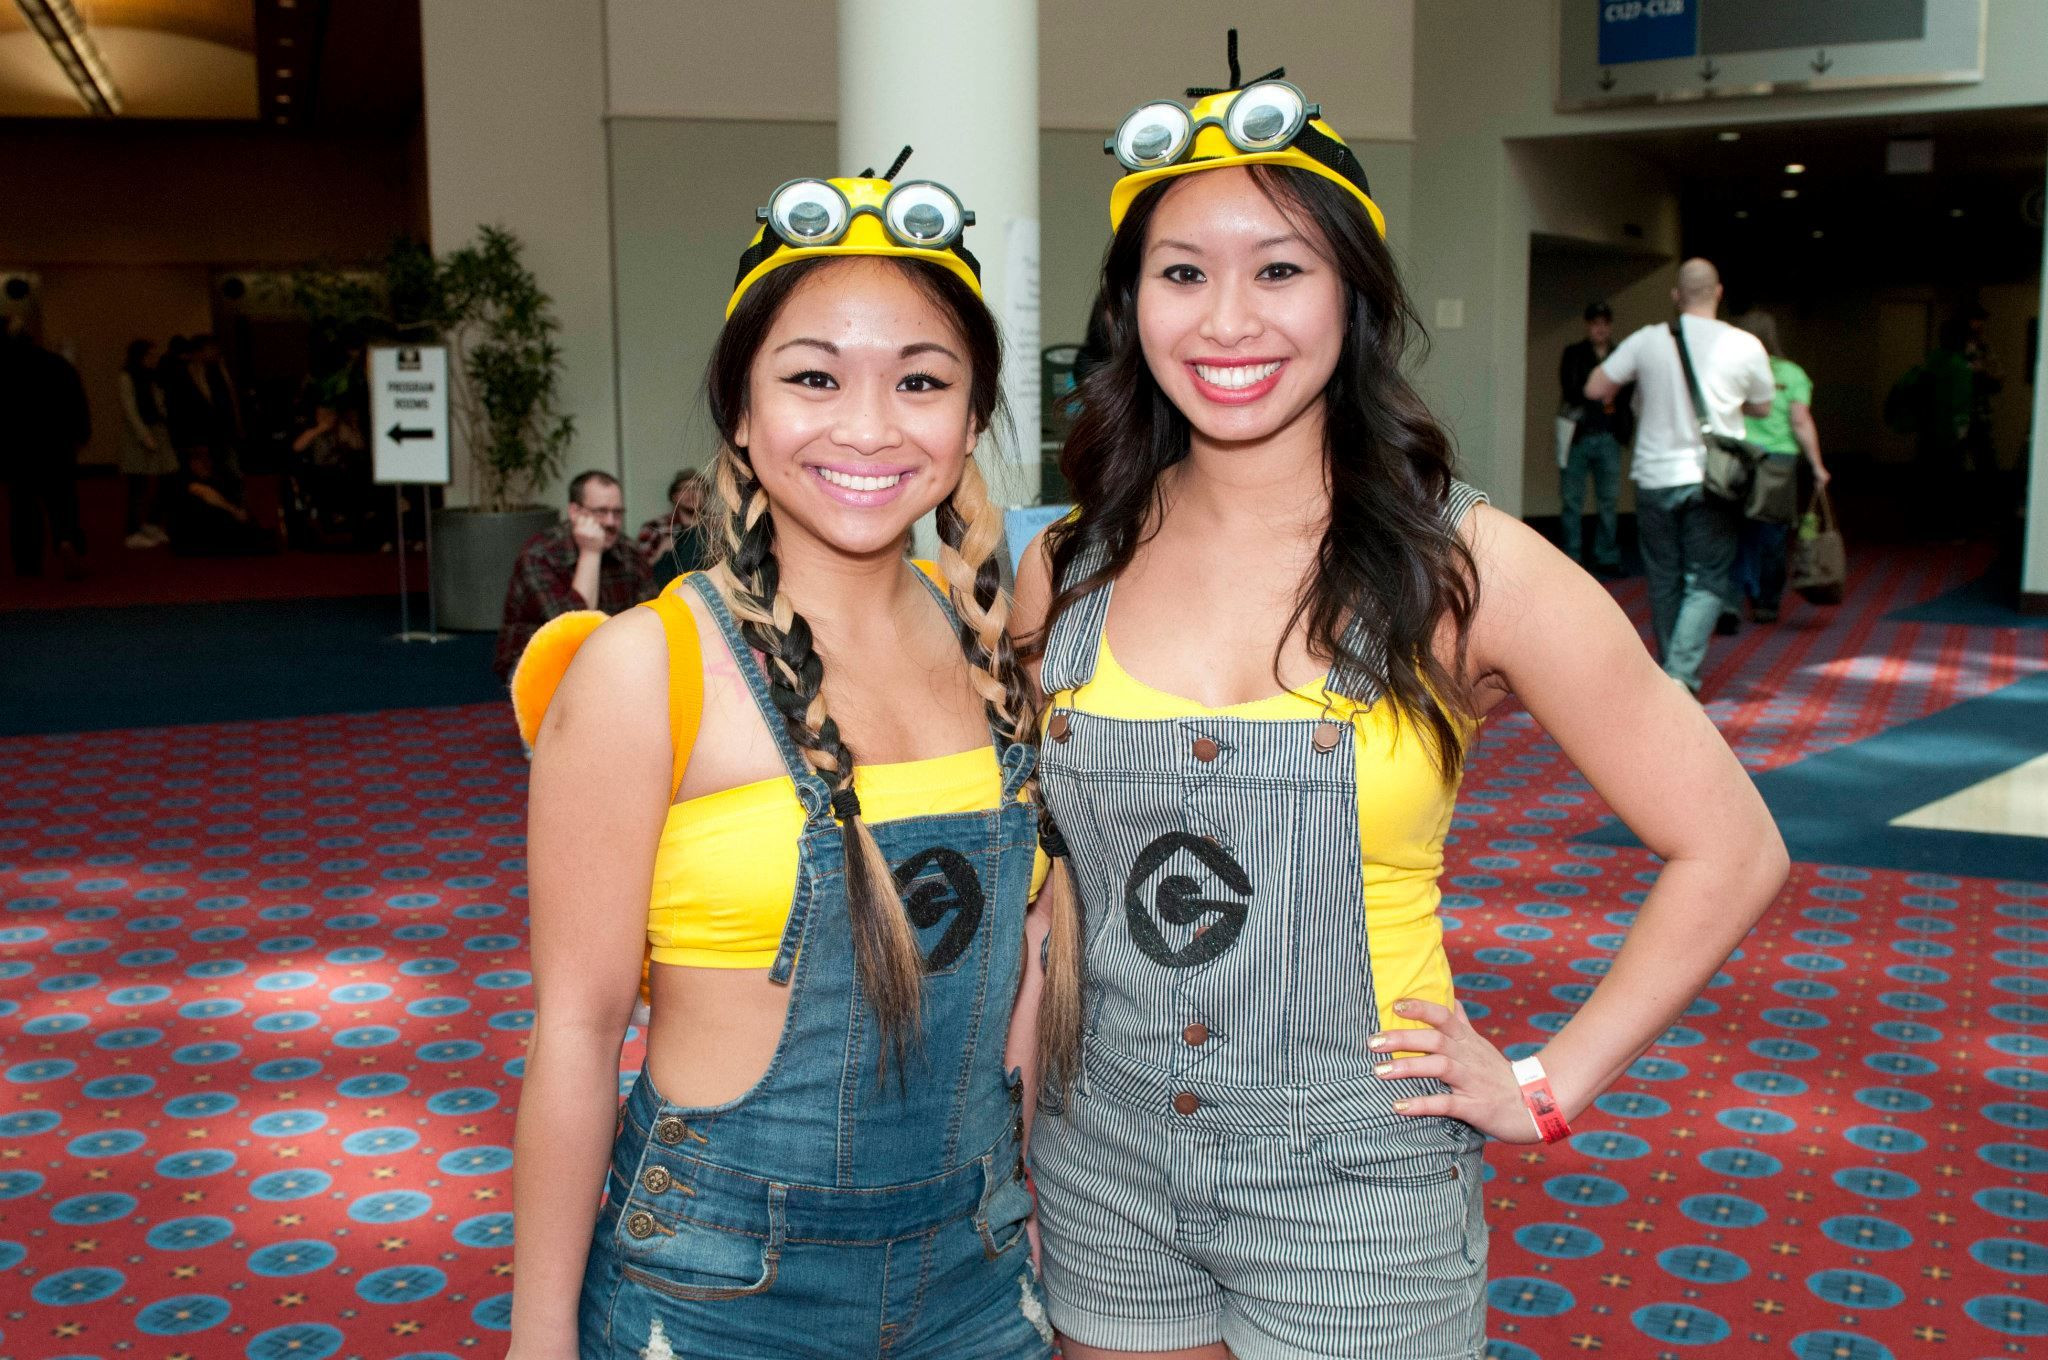 DIY Minion Costume Without Overalls
 Make a Minion costume for Halloween use suspenders